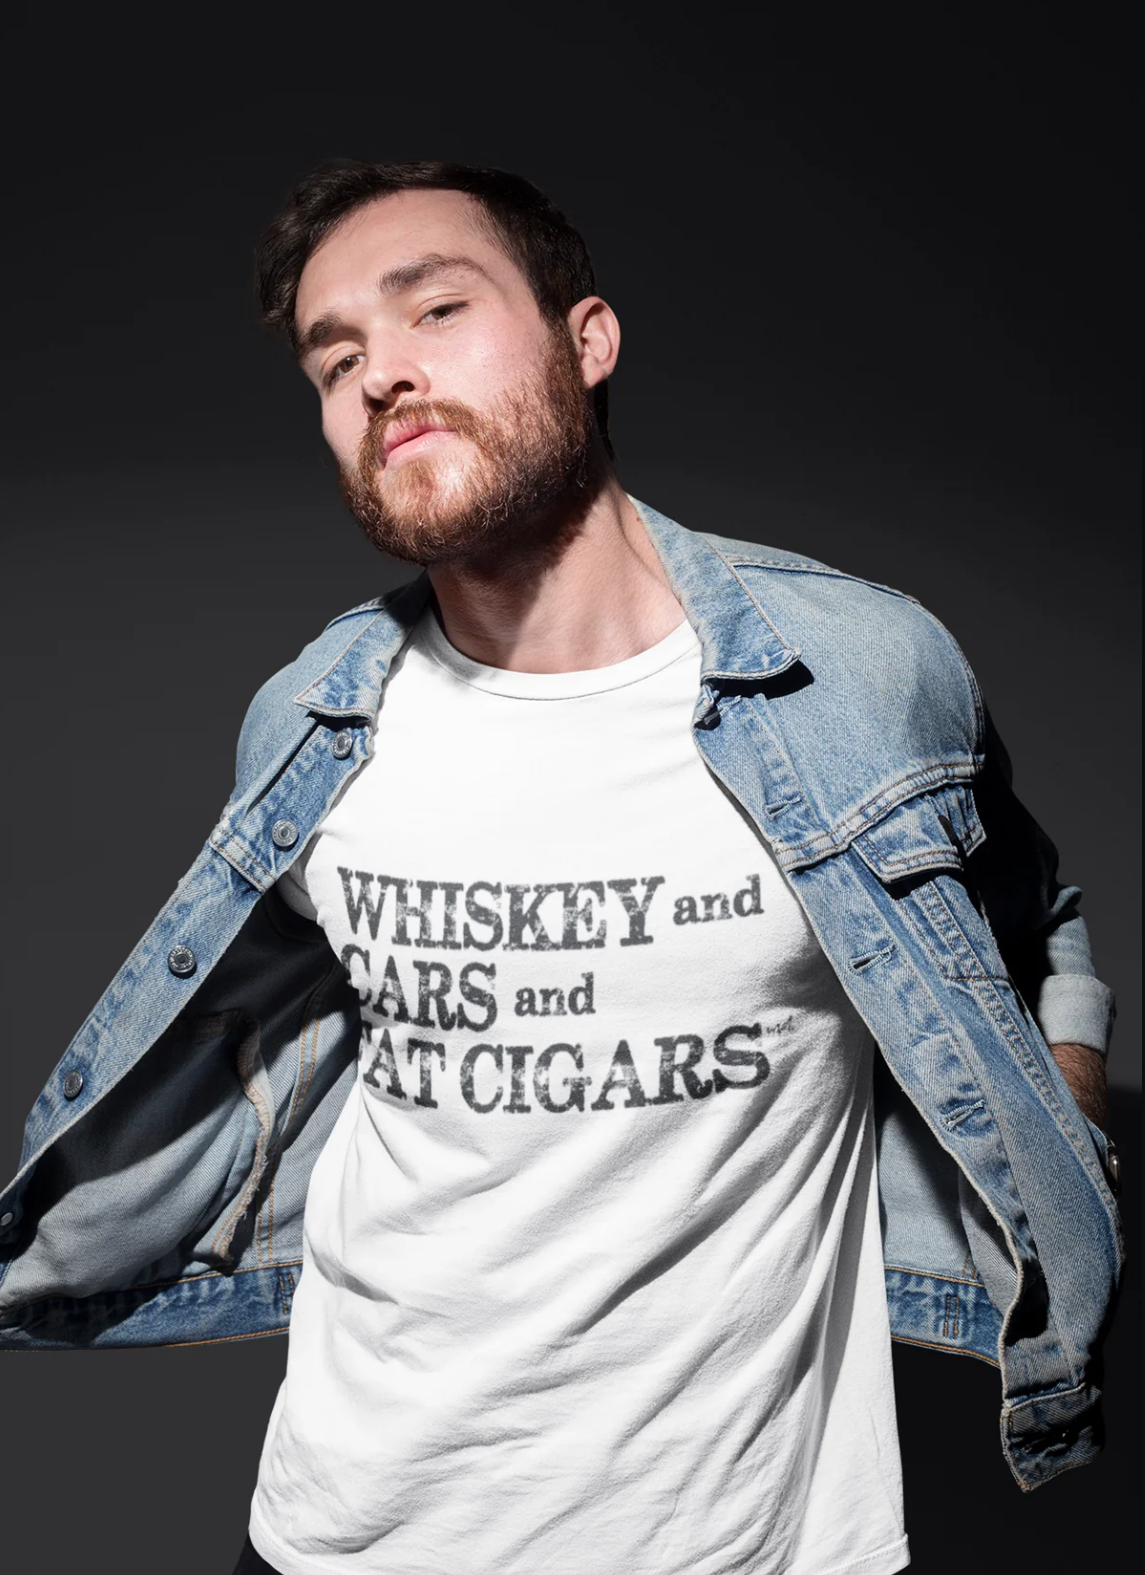 WHISKEY AND CARS AND FAT CIGARS BLACK LETTERING I MEN'S T-SHIRT